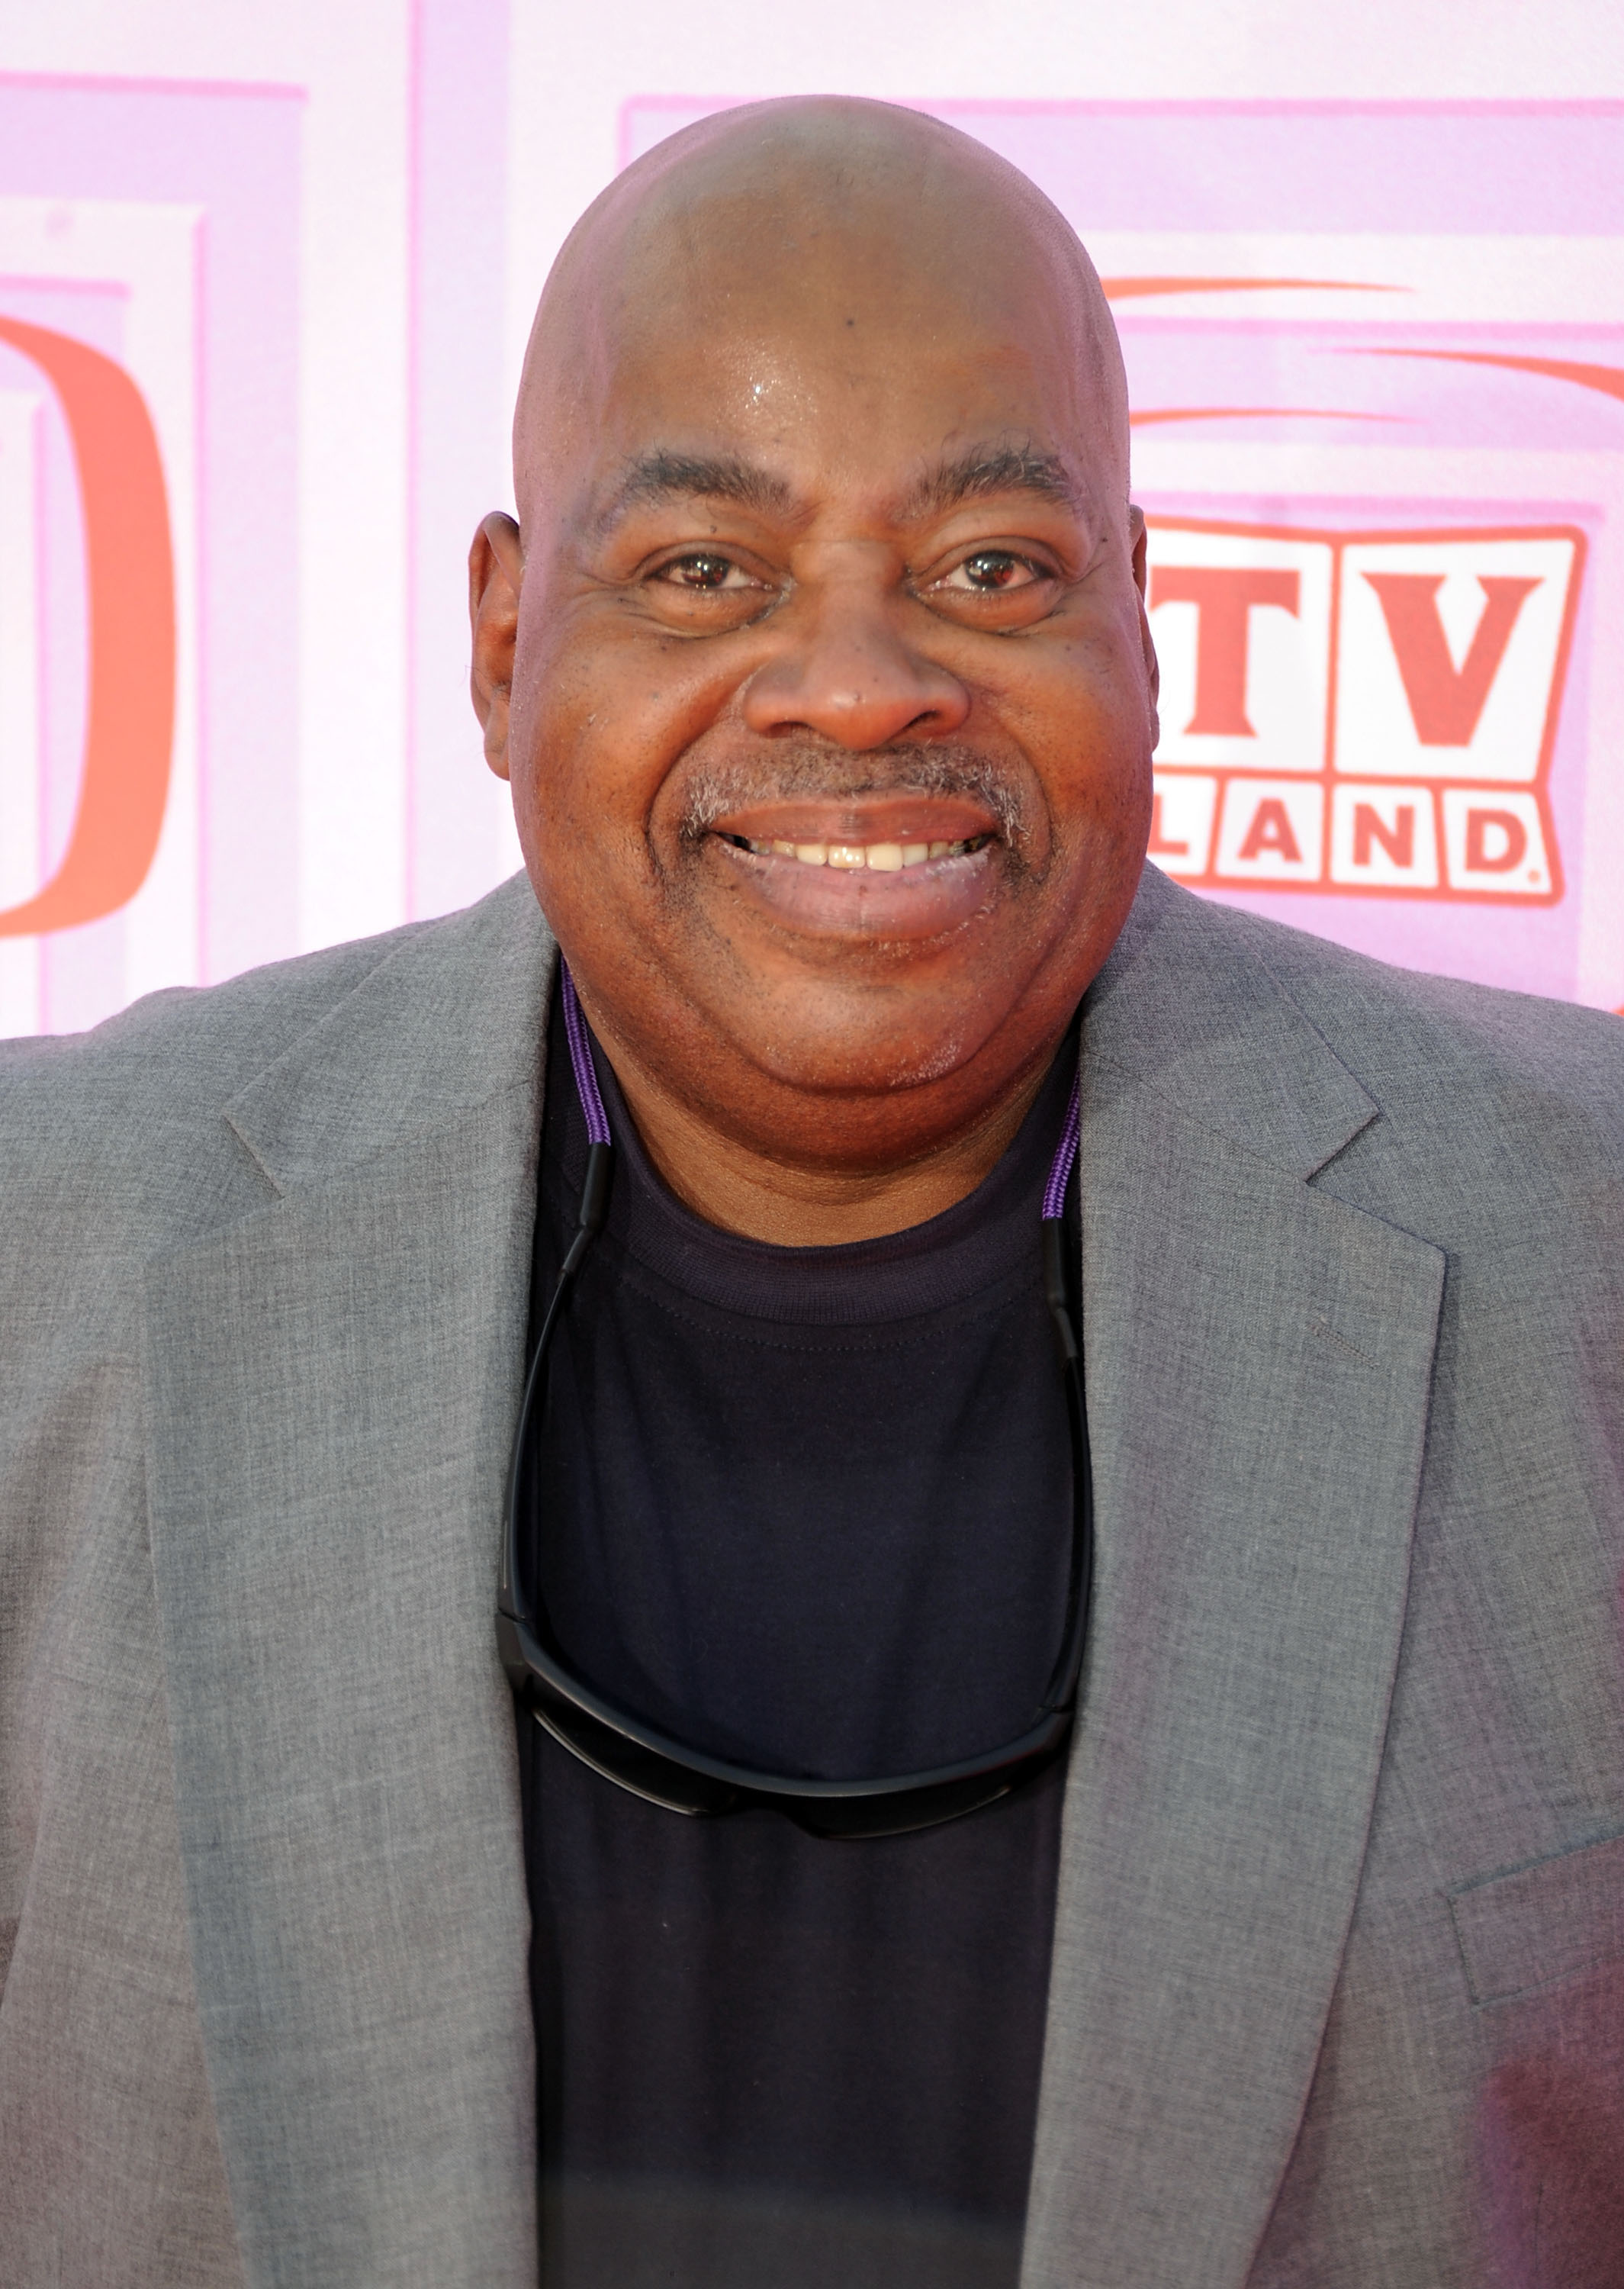 Reginald VelJohnson arrives at the 7th Annual TV Land Awards held at Gibson Amphitheatre on April 19, 2009 in Universal City, California. | Source: Getty Images